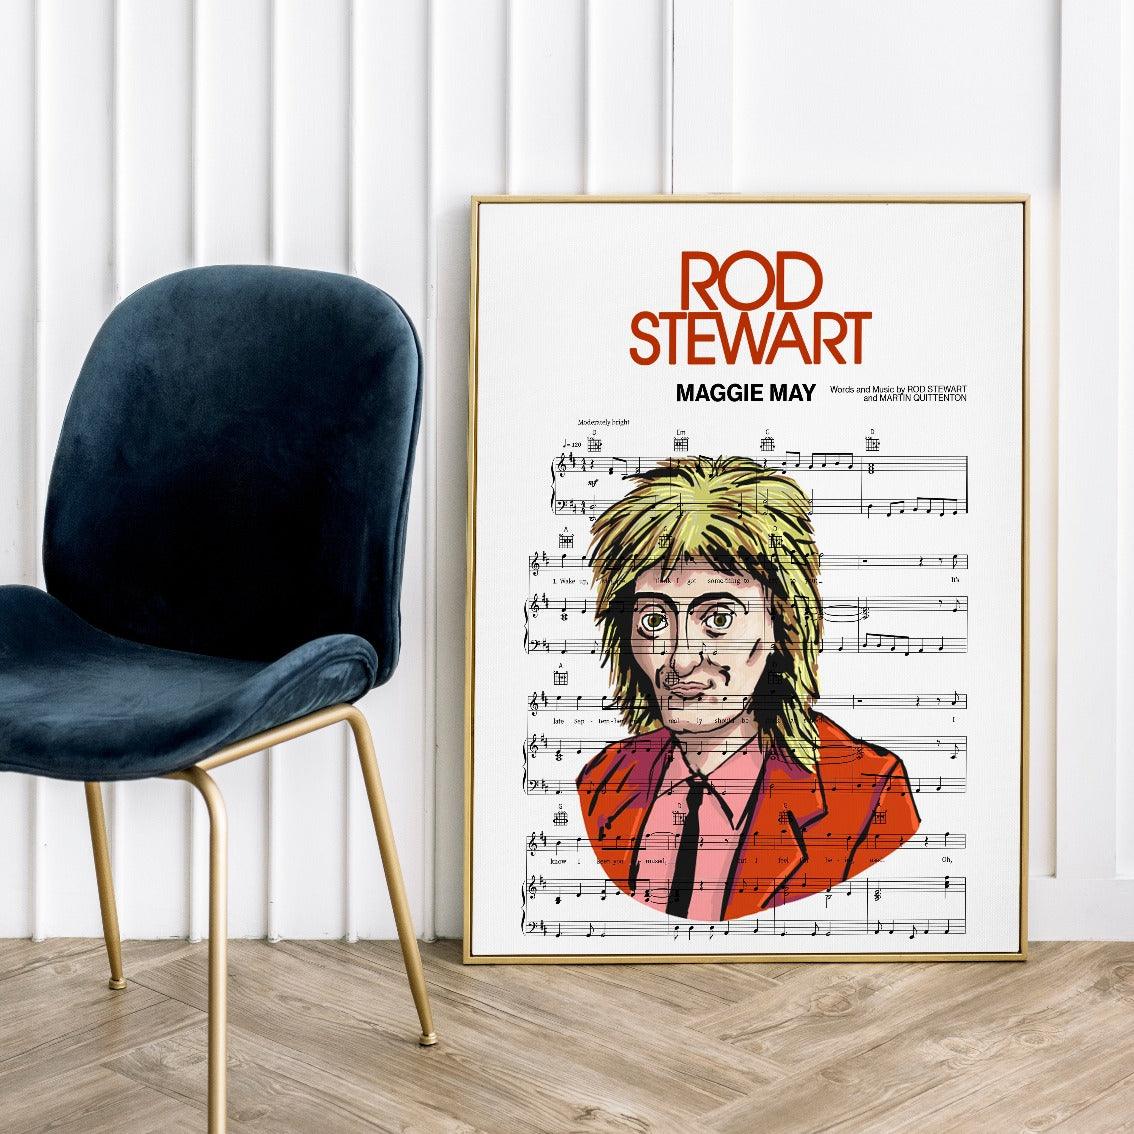 Print lyrical with these unusual and Natural High quality black and white musical scores with brightly coloured illustrations and quirky art print by artist Rod Stewart to put on the wall of the room at home. A4 Posters uk By 98types art online.